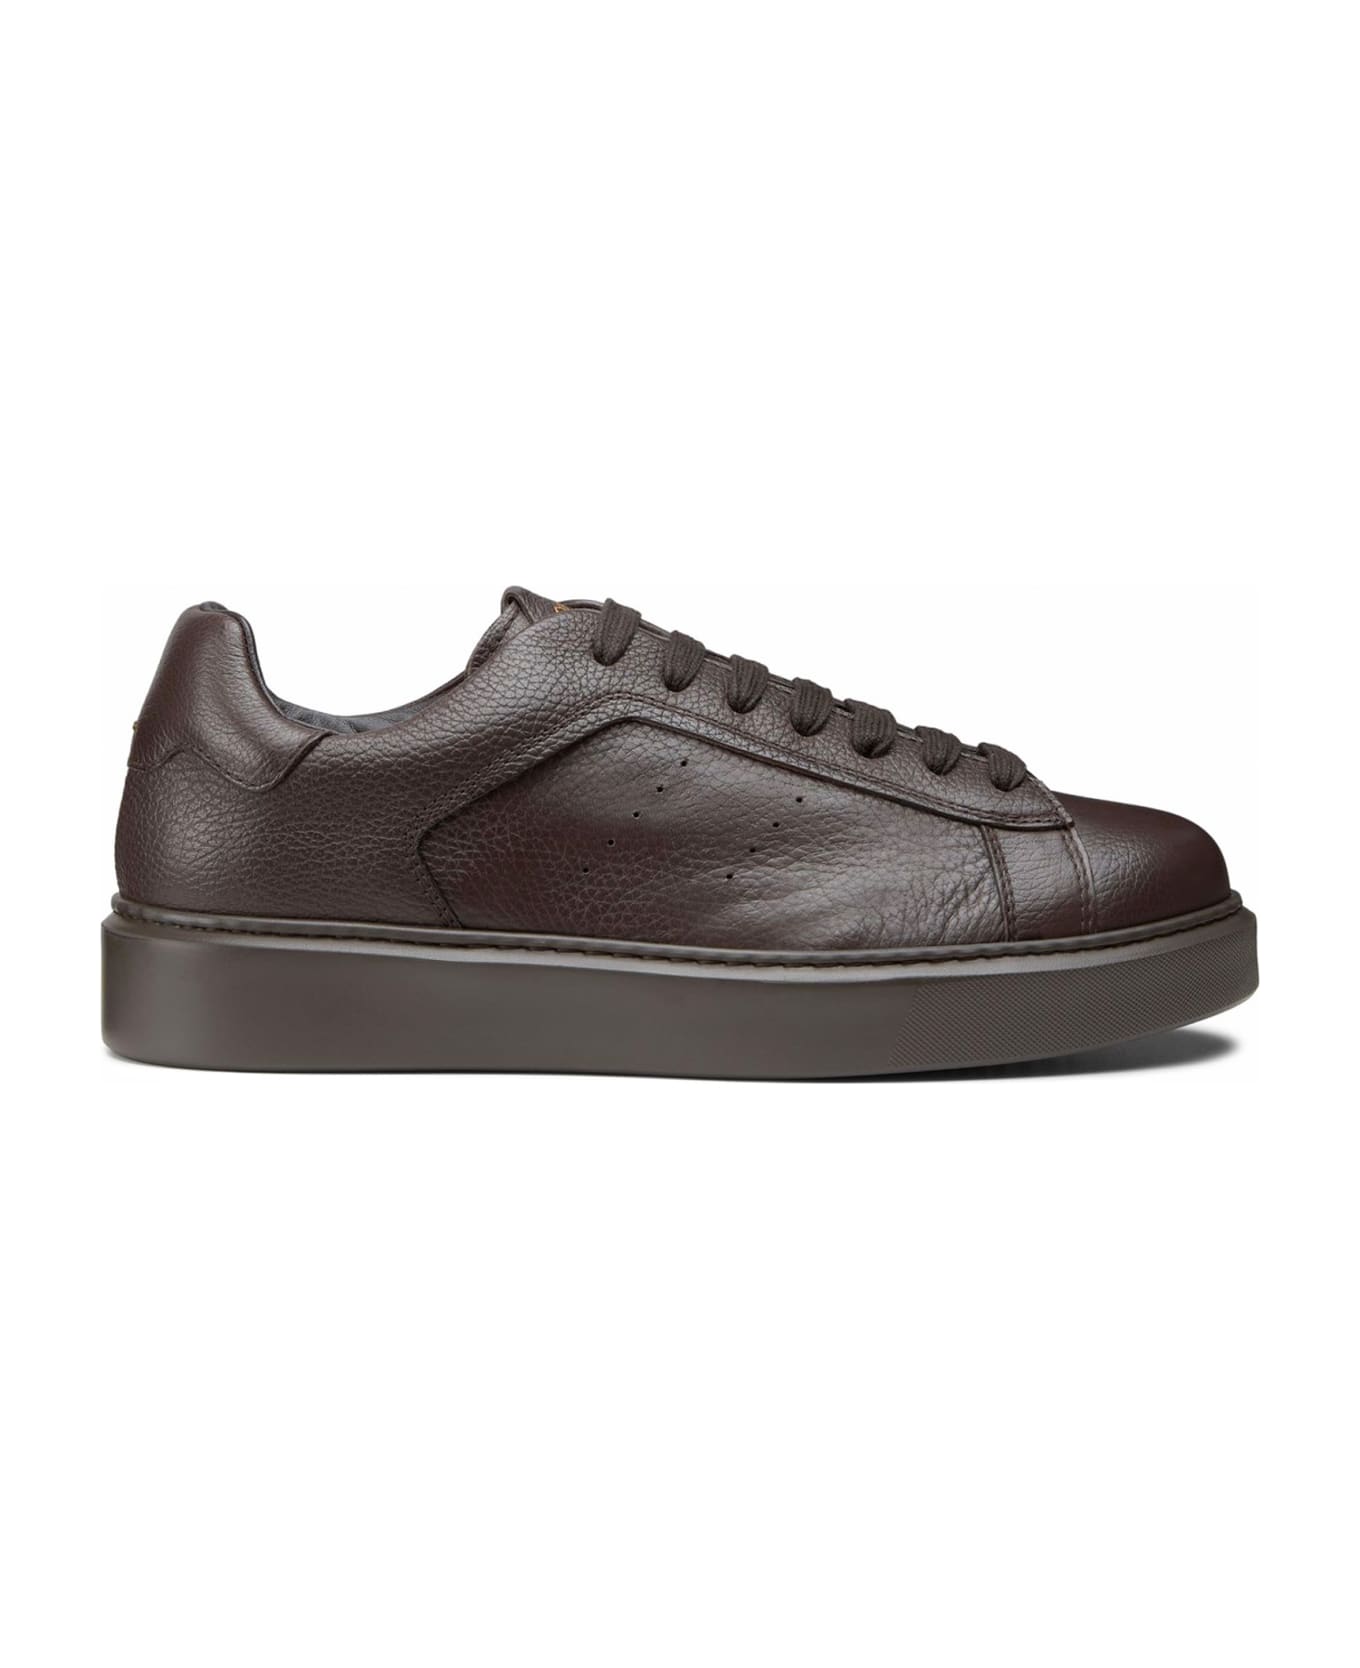 Doucal's Dark Brown Tumbled Leather Sneaker - Tabacco